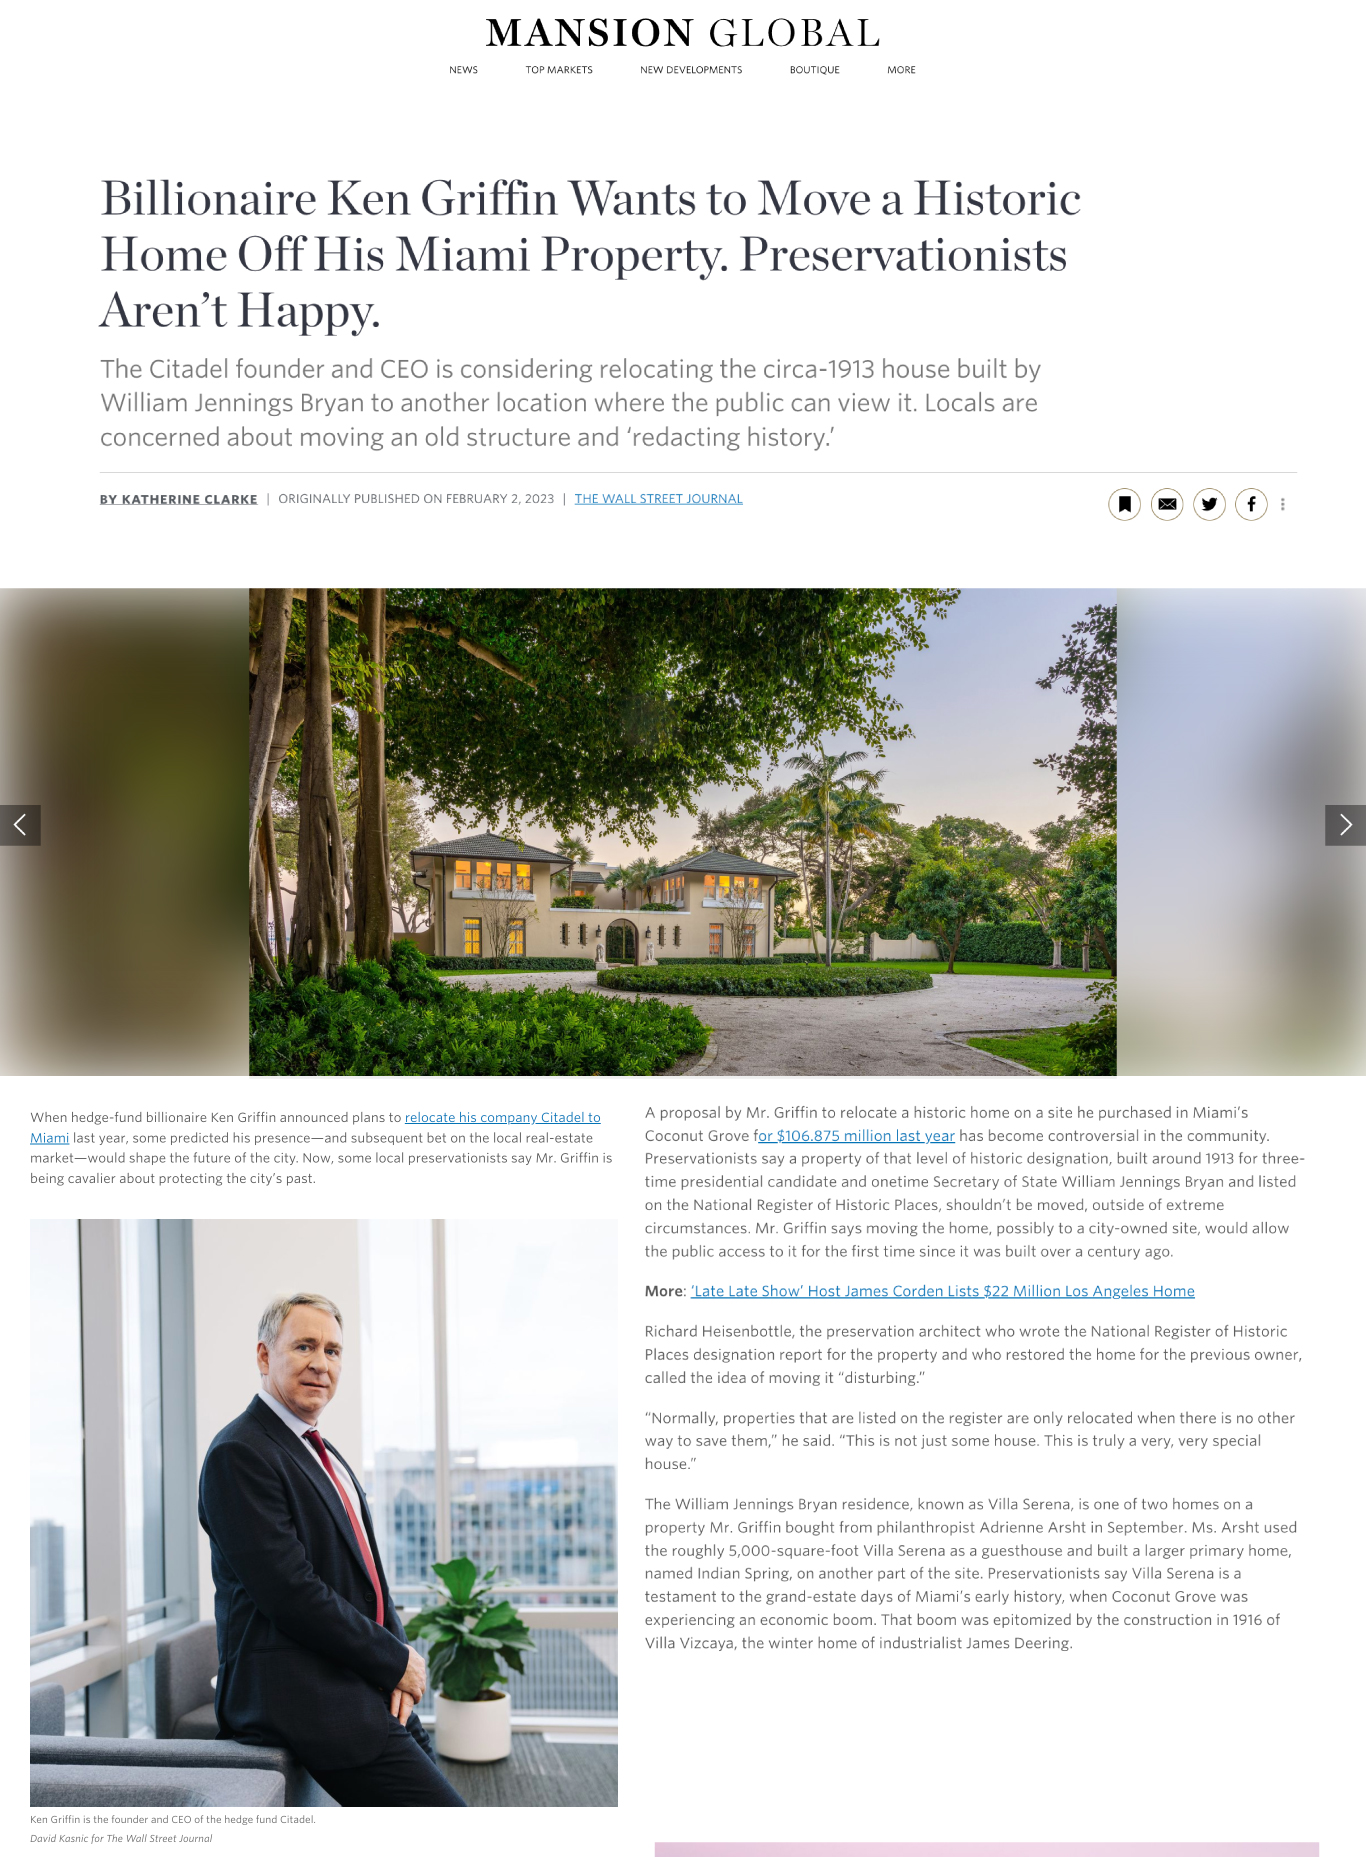 Billionaire Ken Griffin Wants to Move a Historic Home Off His Miami Property. Preservationists Aren’t Happy.